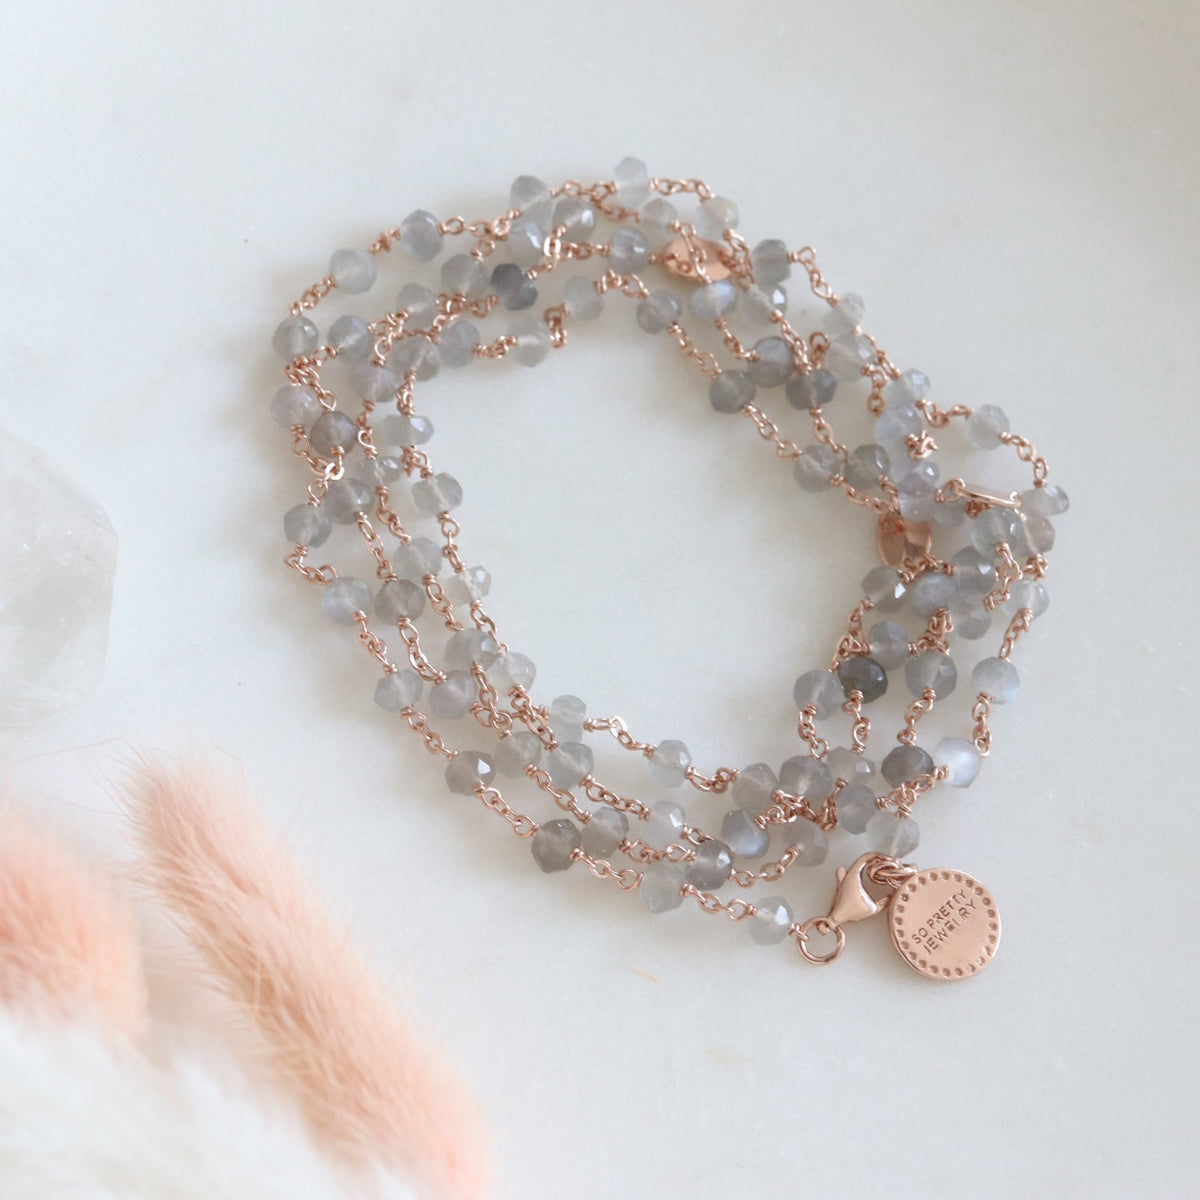 ICONIC LONG BEADED NECKLACE - GREY MOONSTONE &amp; ROSE GOLD 34&quot; - SO PRETTY CARA COTTER